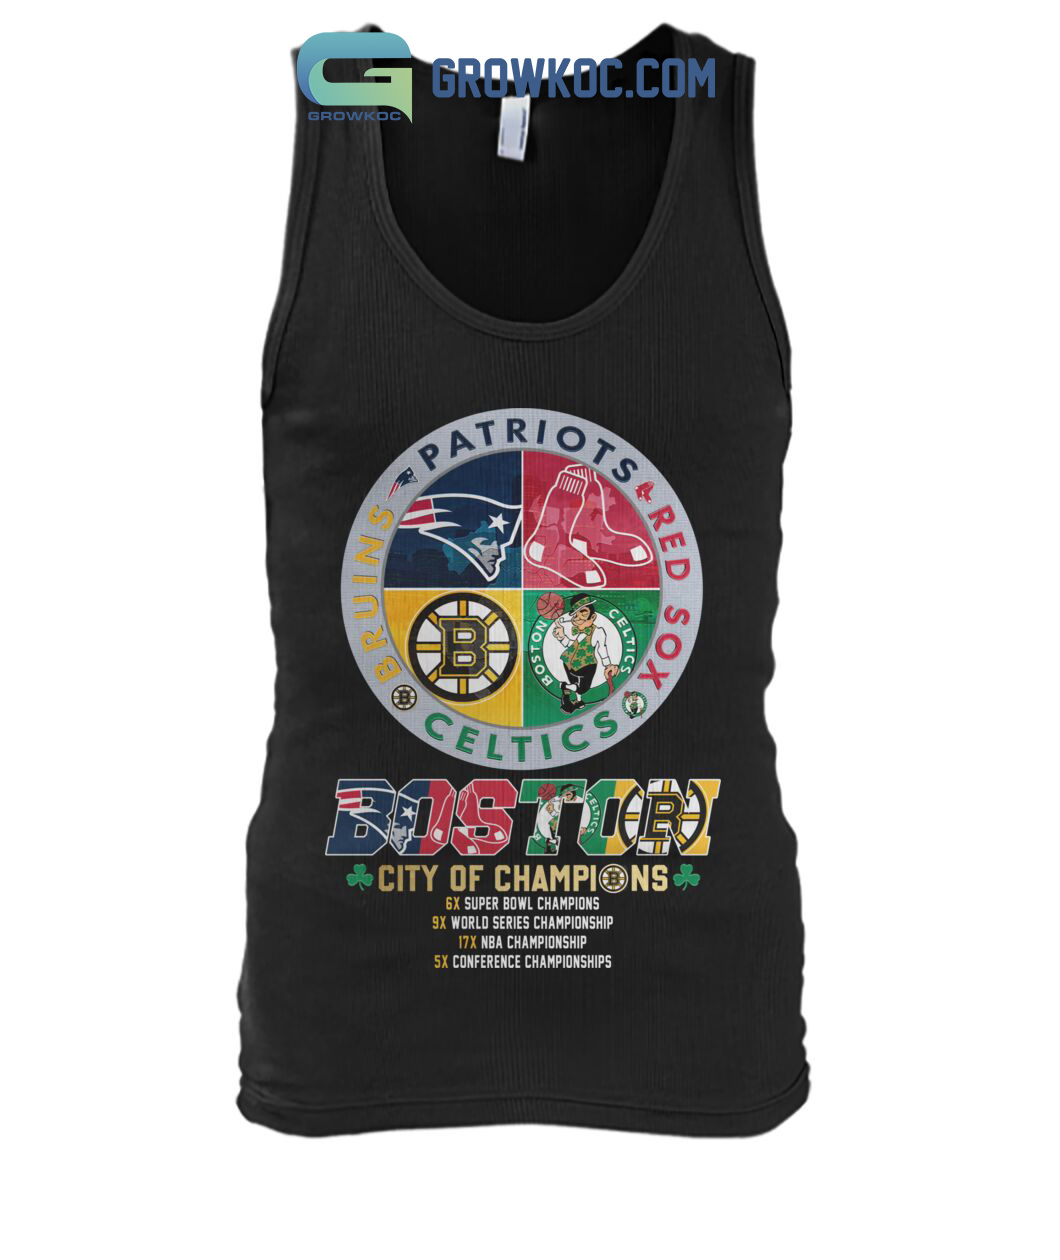 Official Boston city of champions Boston red sox Patriots Bruins celtics  2023 T-shirt, hoodie, tank top, sweater and long sleeve t-shirt